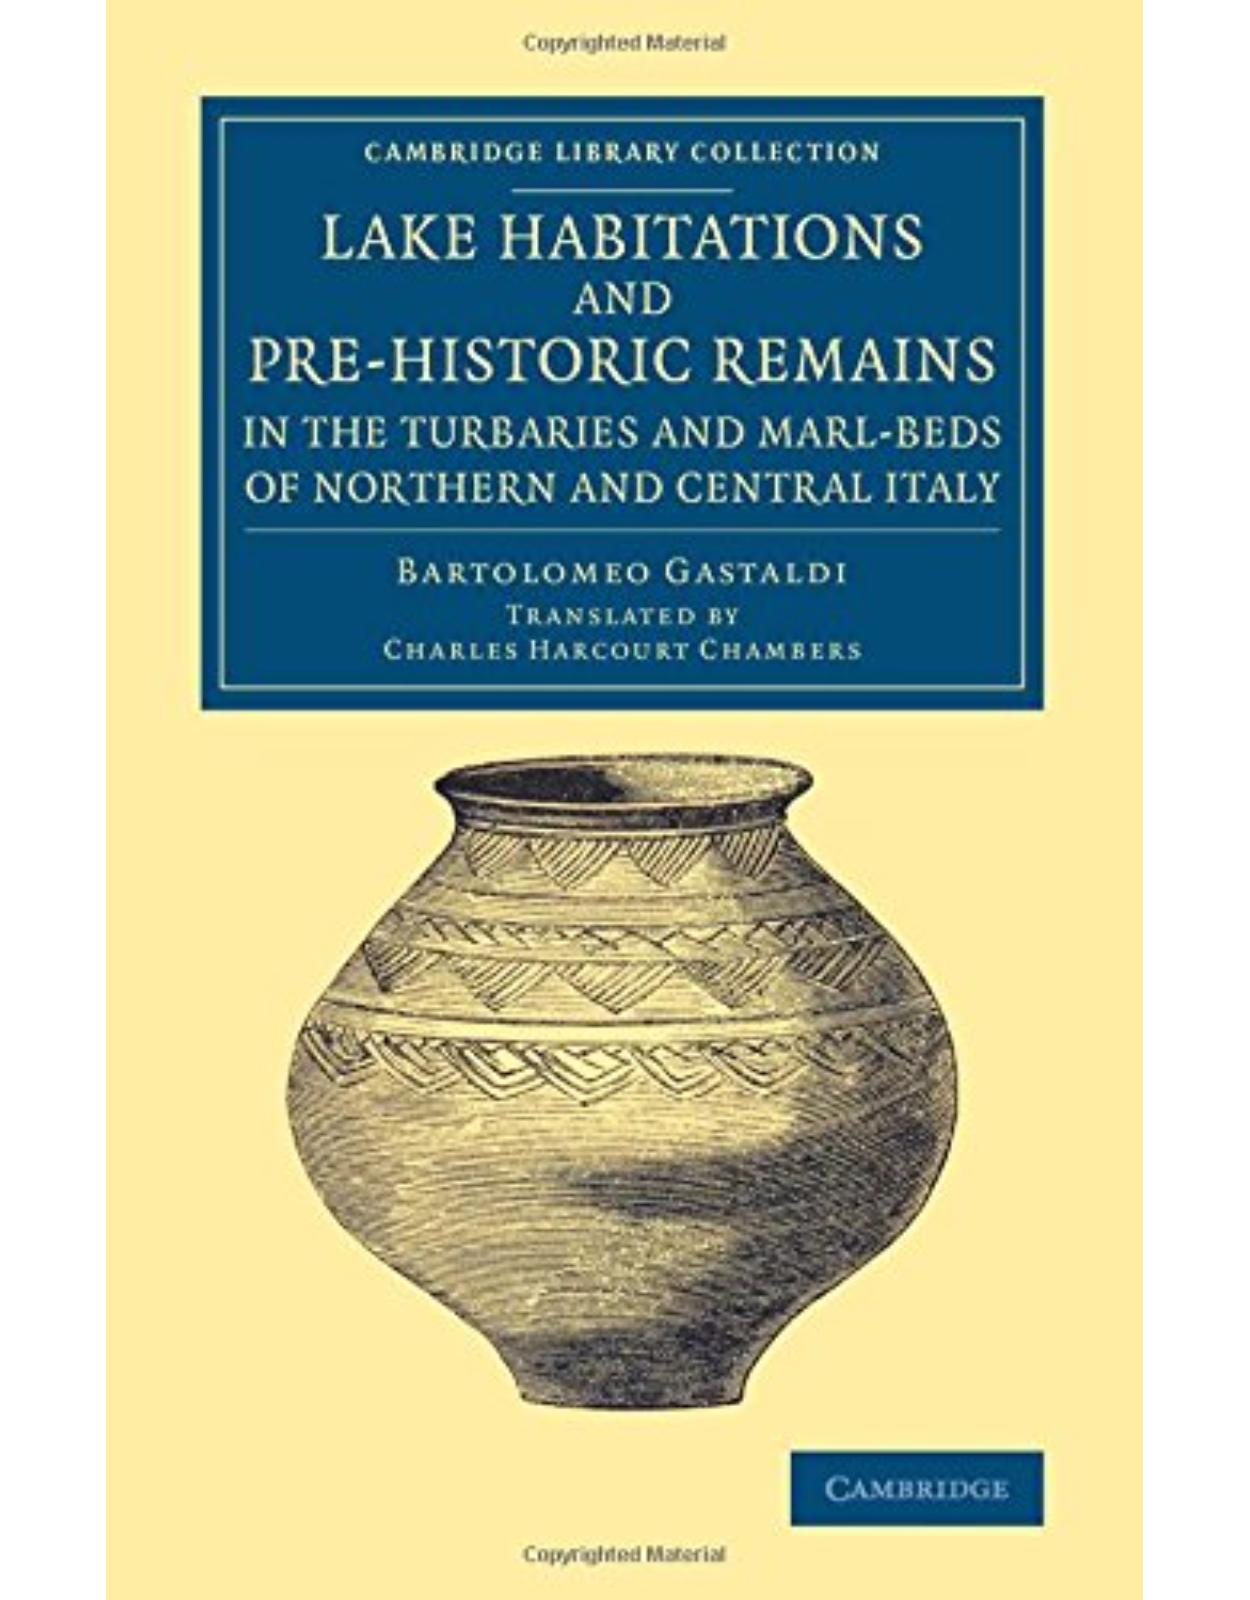 Lake Habitations and Pre-Historic Remains in the Turbaries and Marl-Beds of Northern and Central Italy (Cambridge Library Collection - Archaeology)